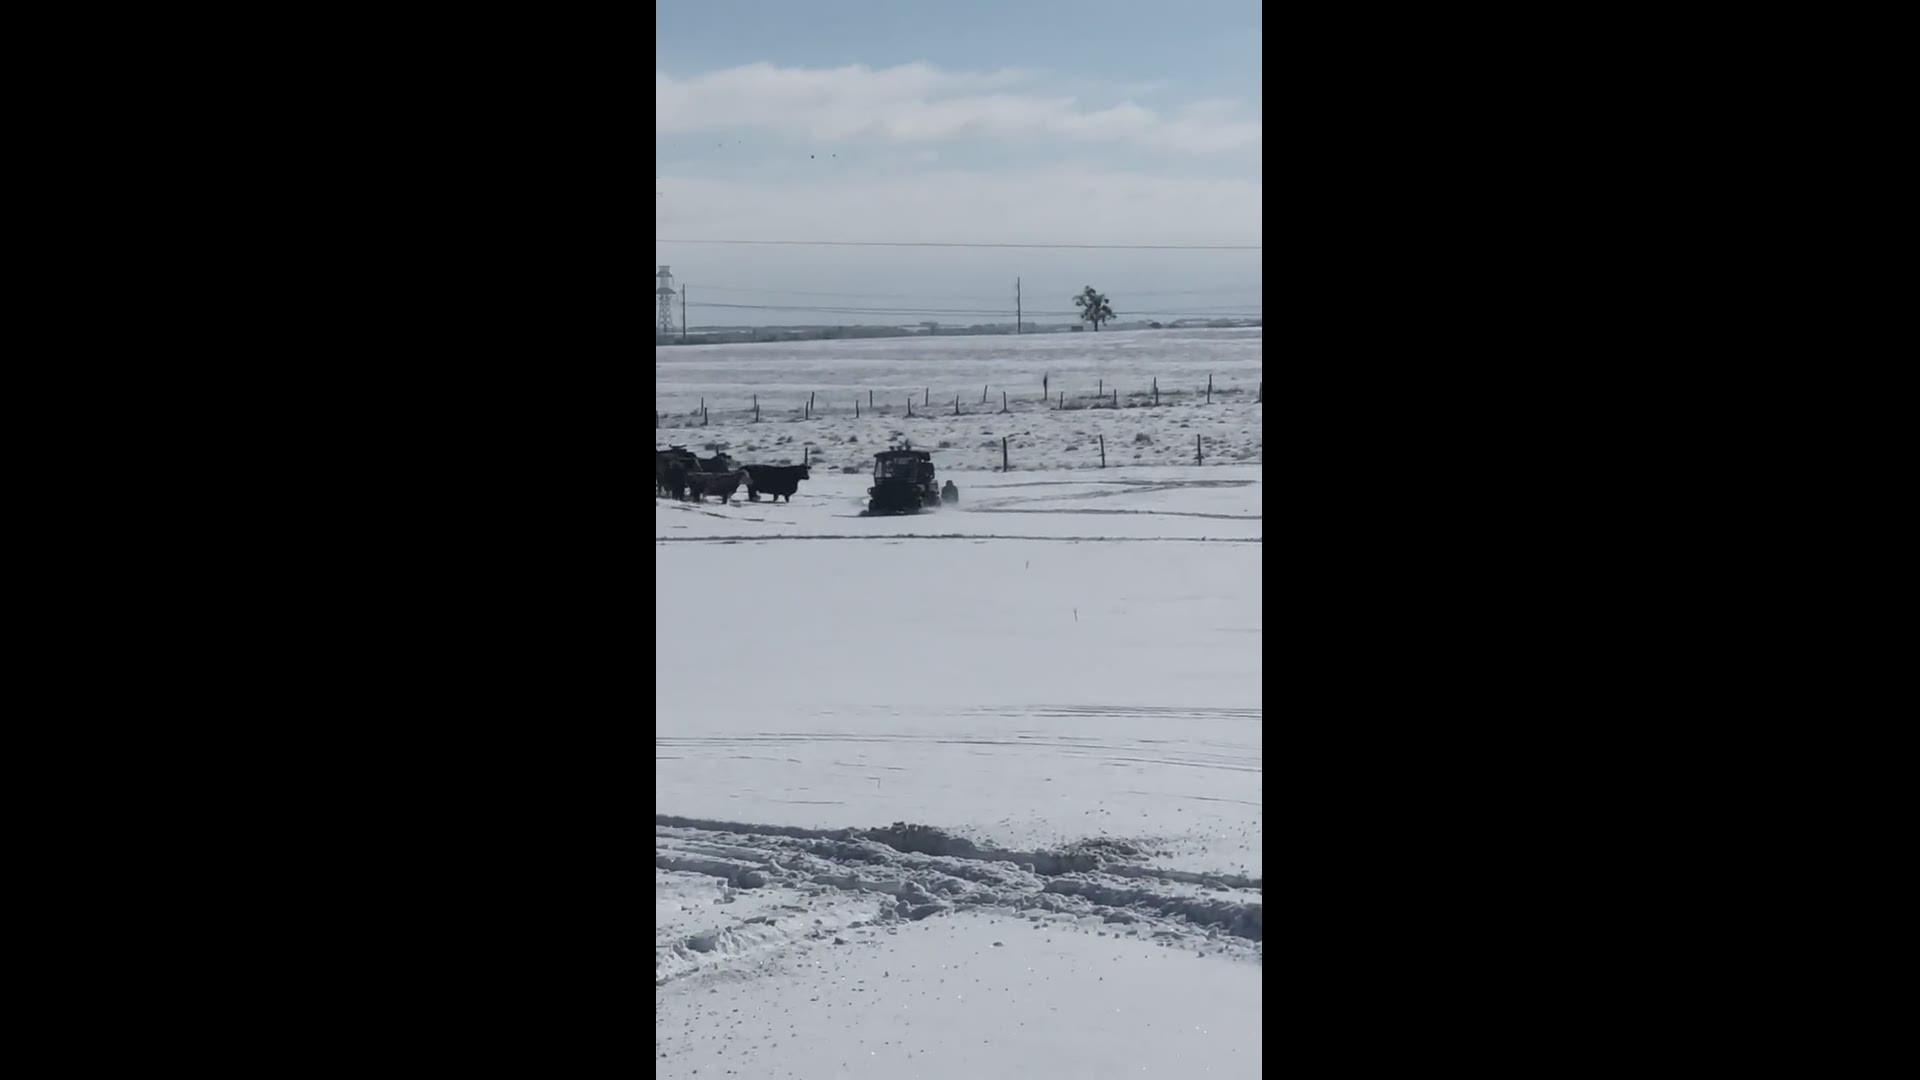 This is how we sled in Texas.
Credit: Karen Massar